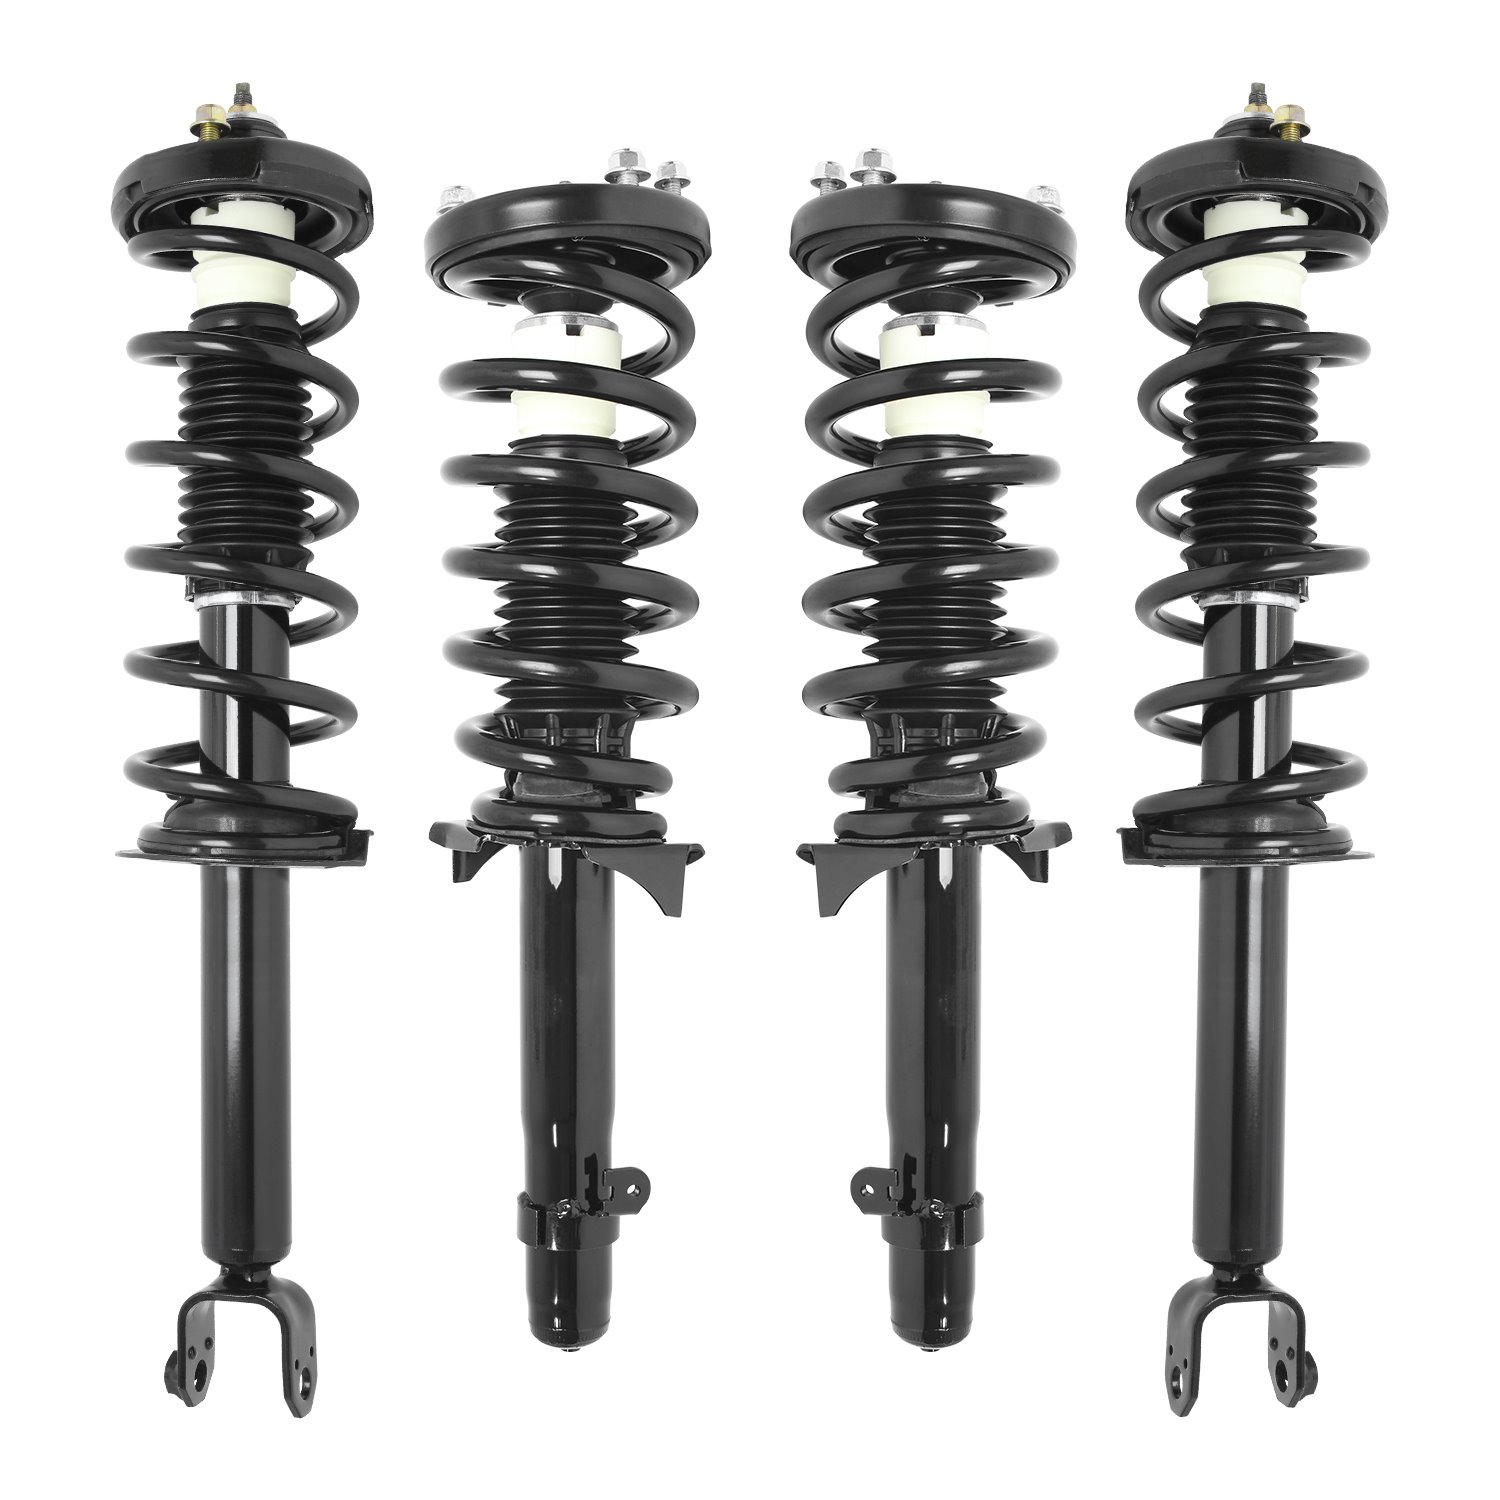 4-11827-15011-001 Front & Rear Suspension Strut & Coil Spring Assembly Kit Fits Select Acura TSX